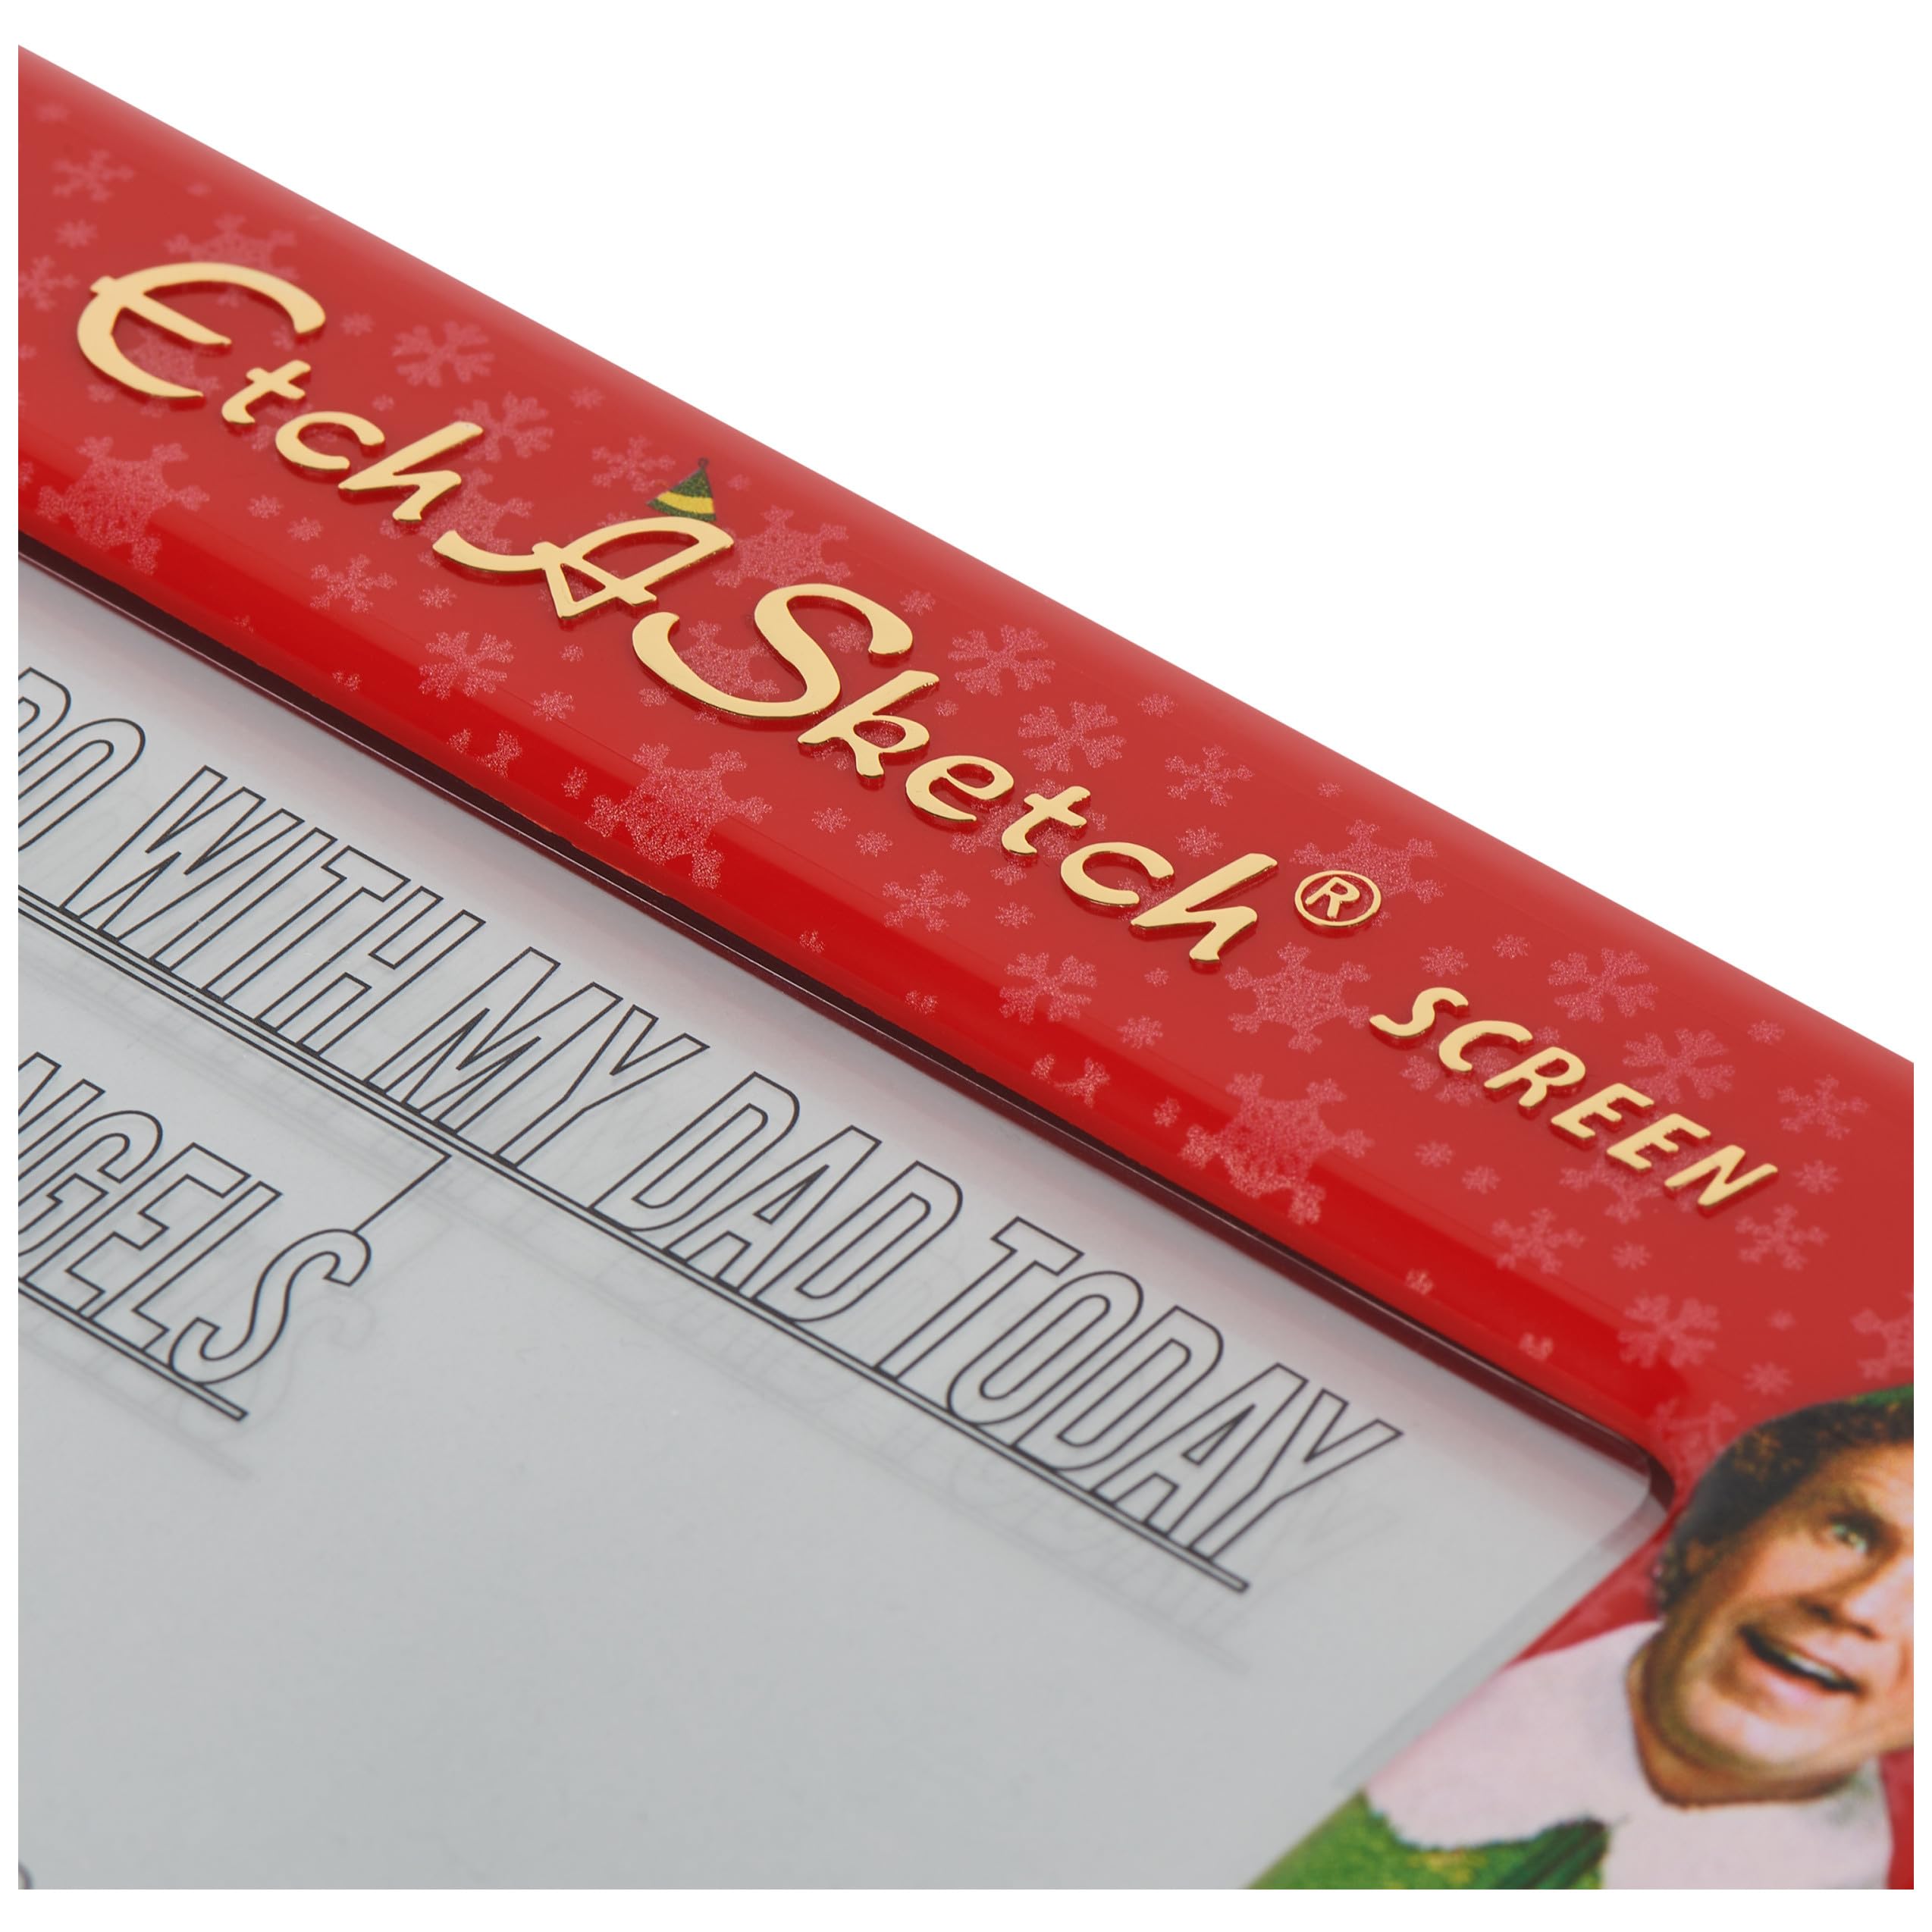 Etch A Sketch, Elf Special Edition, Original Magic Screen, Kids Travel Toy, Drawing Toys for Boys & Girls Ages 3+